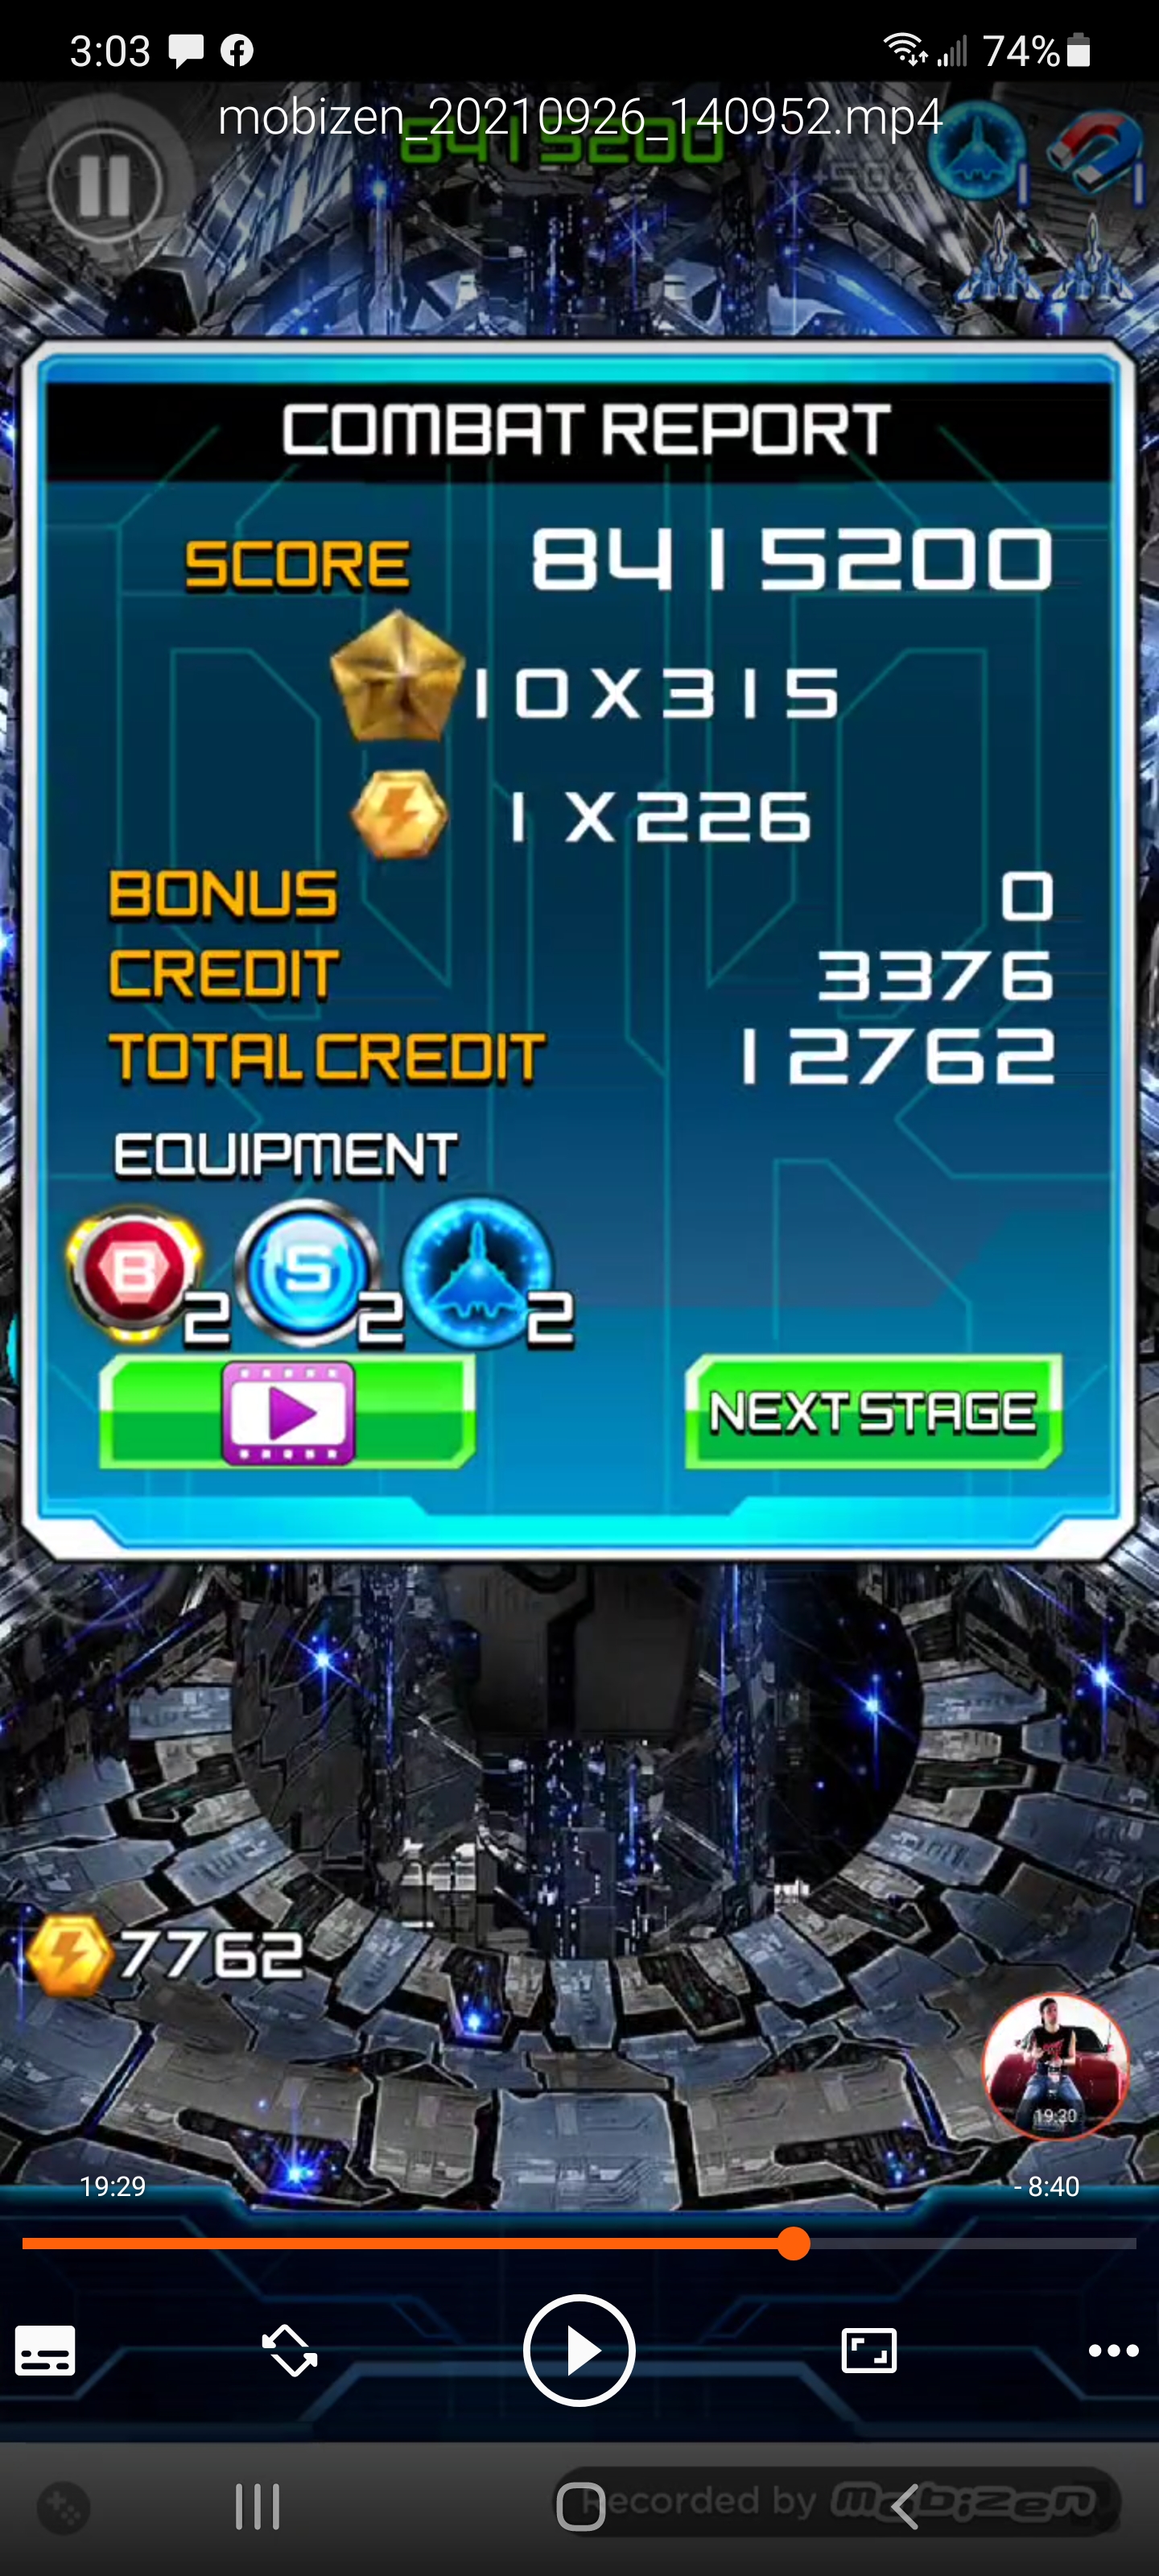 JES: Lightning Fighter 2 (Android) 10,213,400 points on 2021-09-26 16:06:29